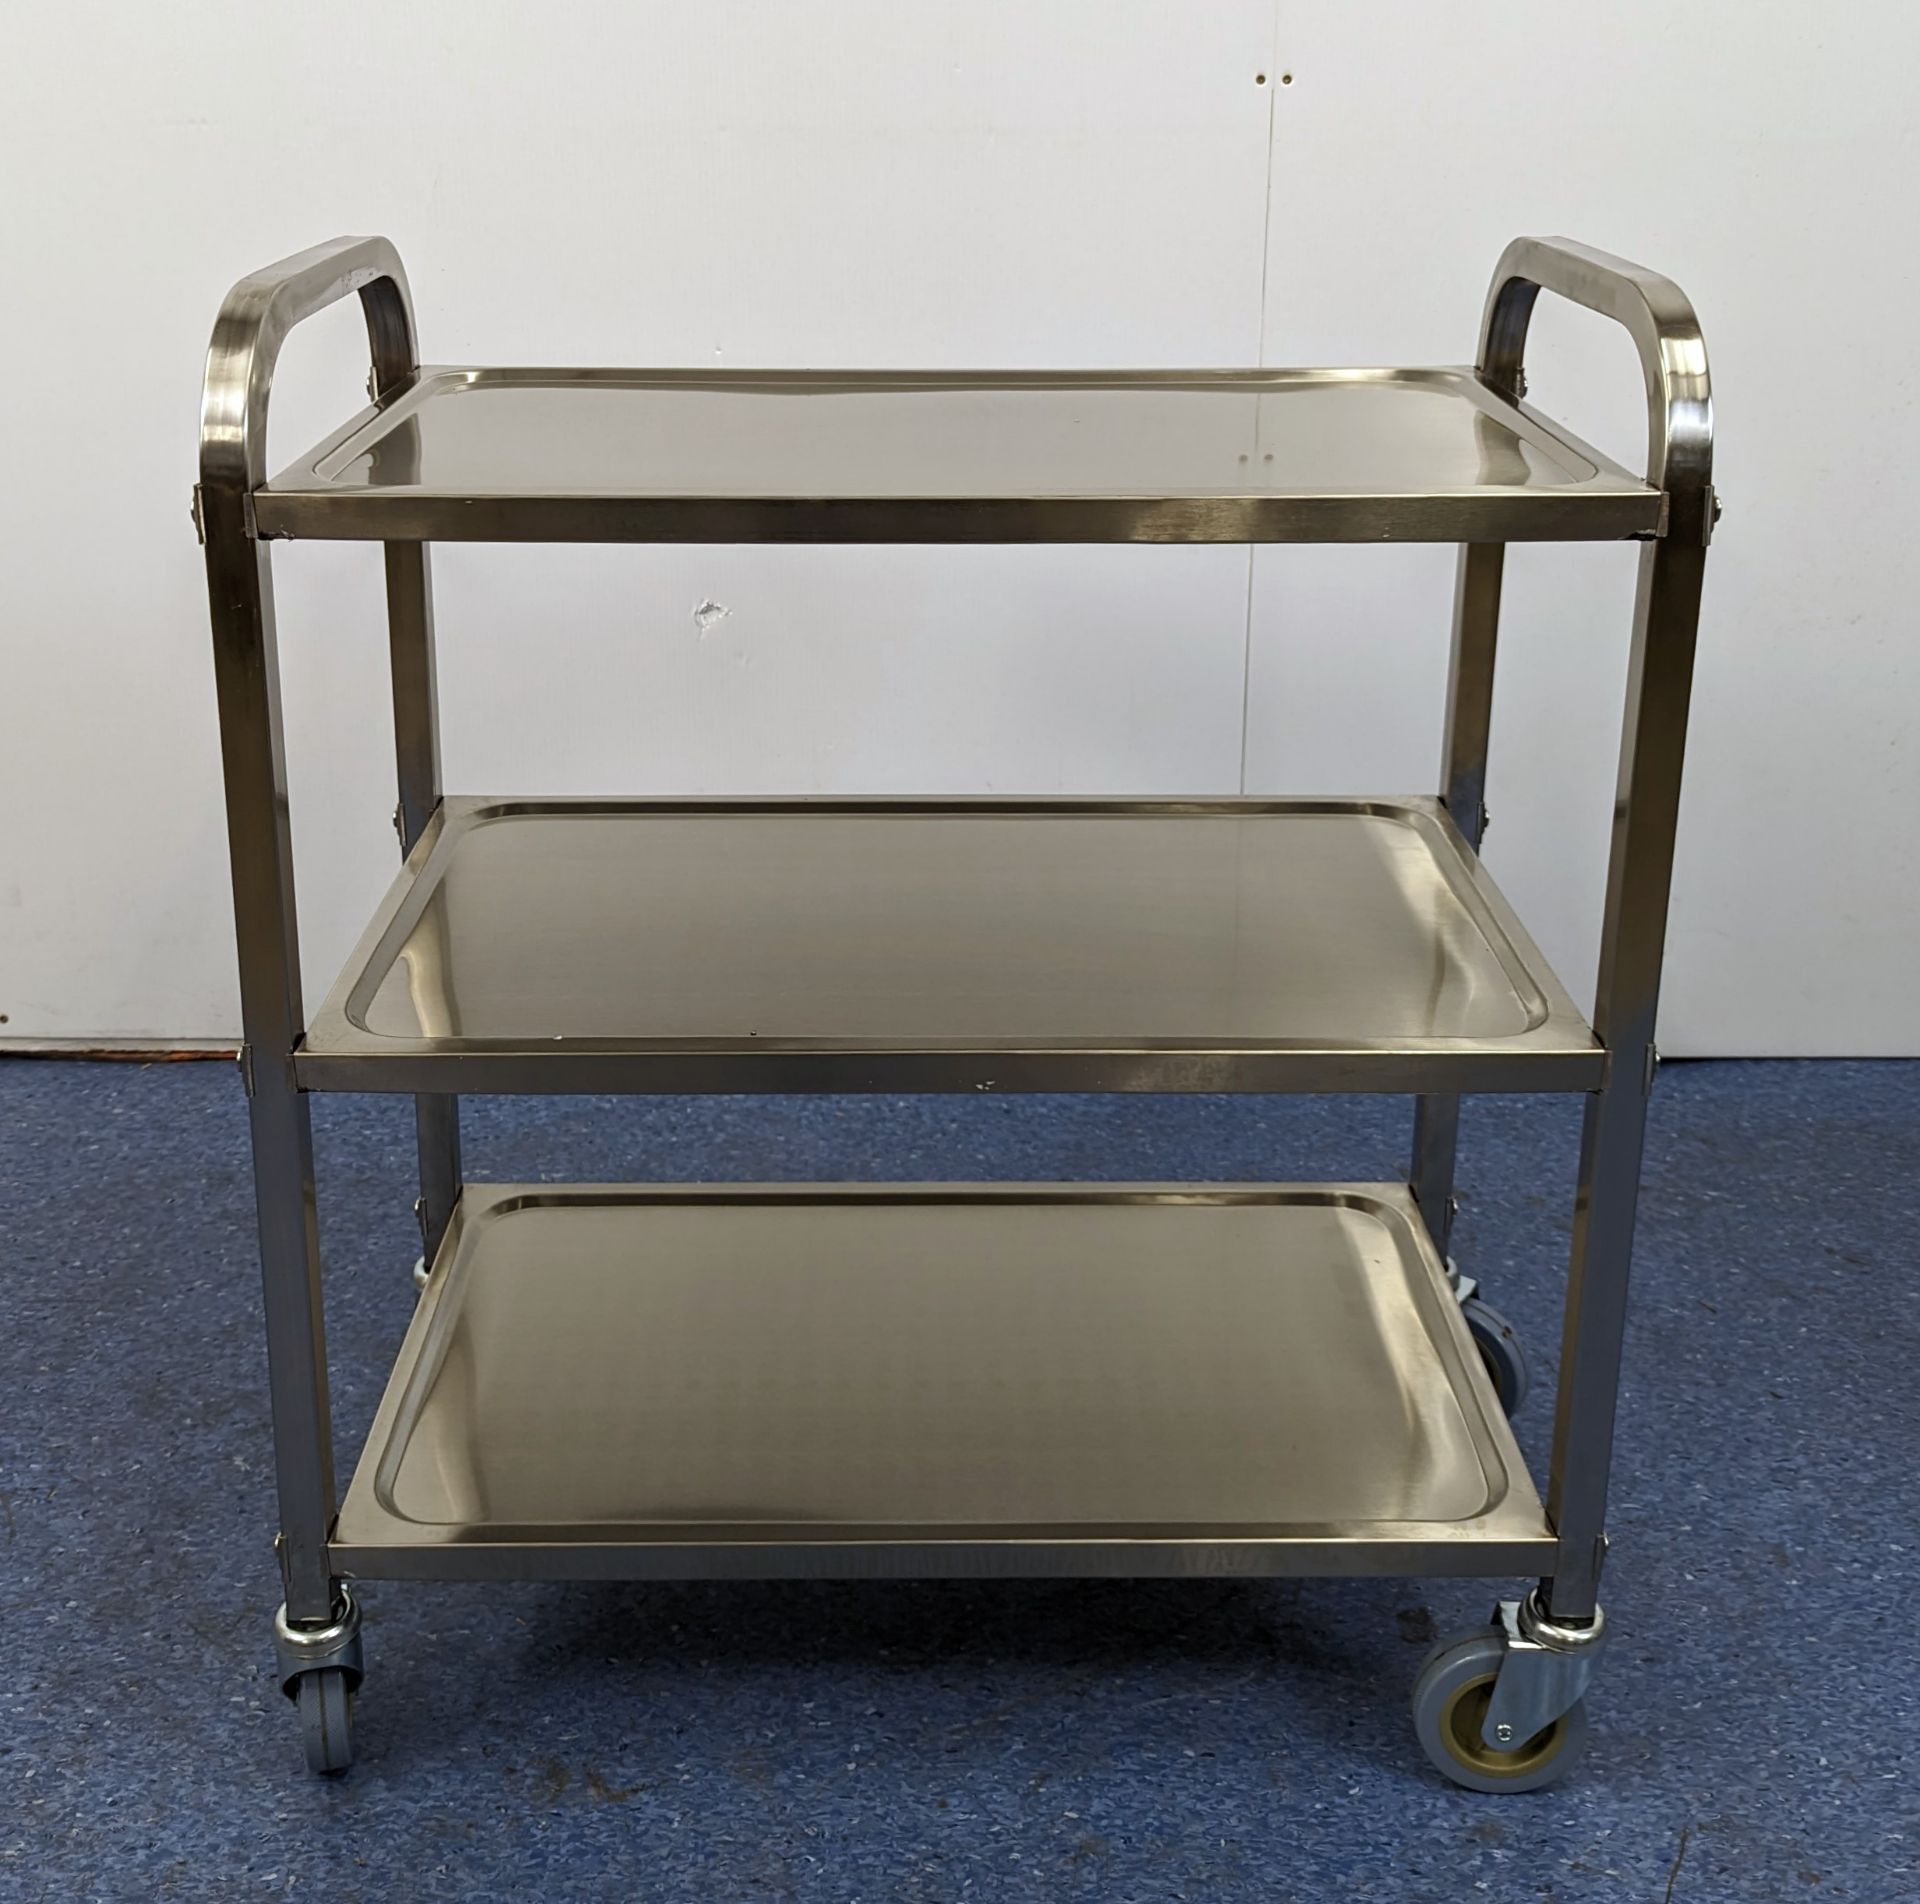 STAINLESS STEEL BUSSING CART WITH 27.25" X 15.75" TRAY SIZE, OMCAN 24418 - Image 4 of 5